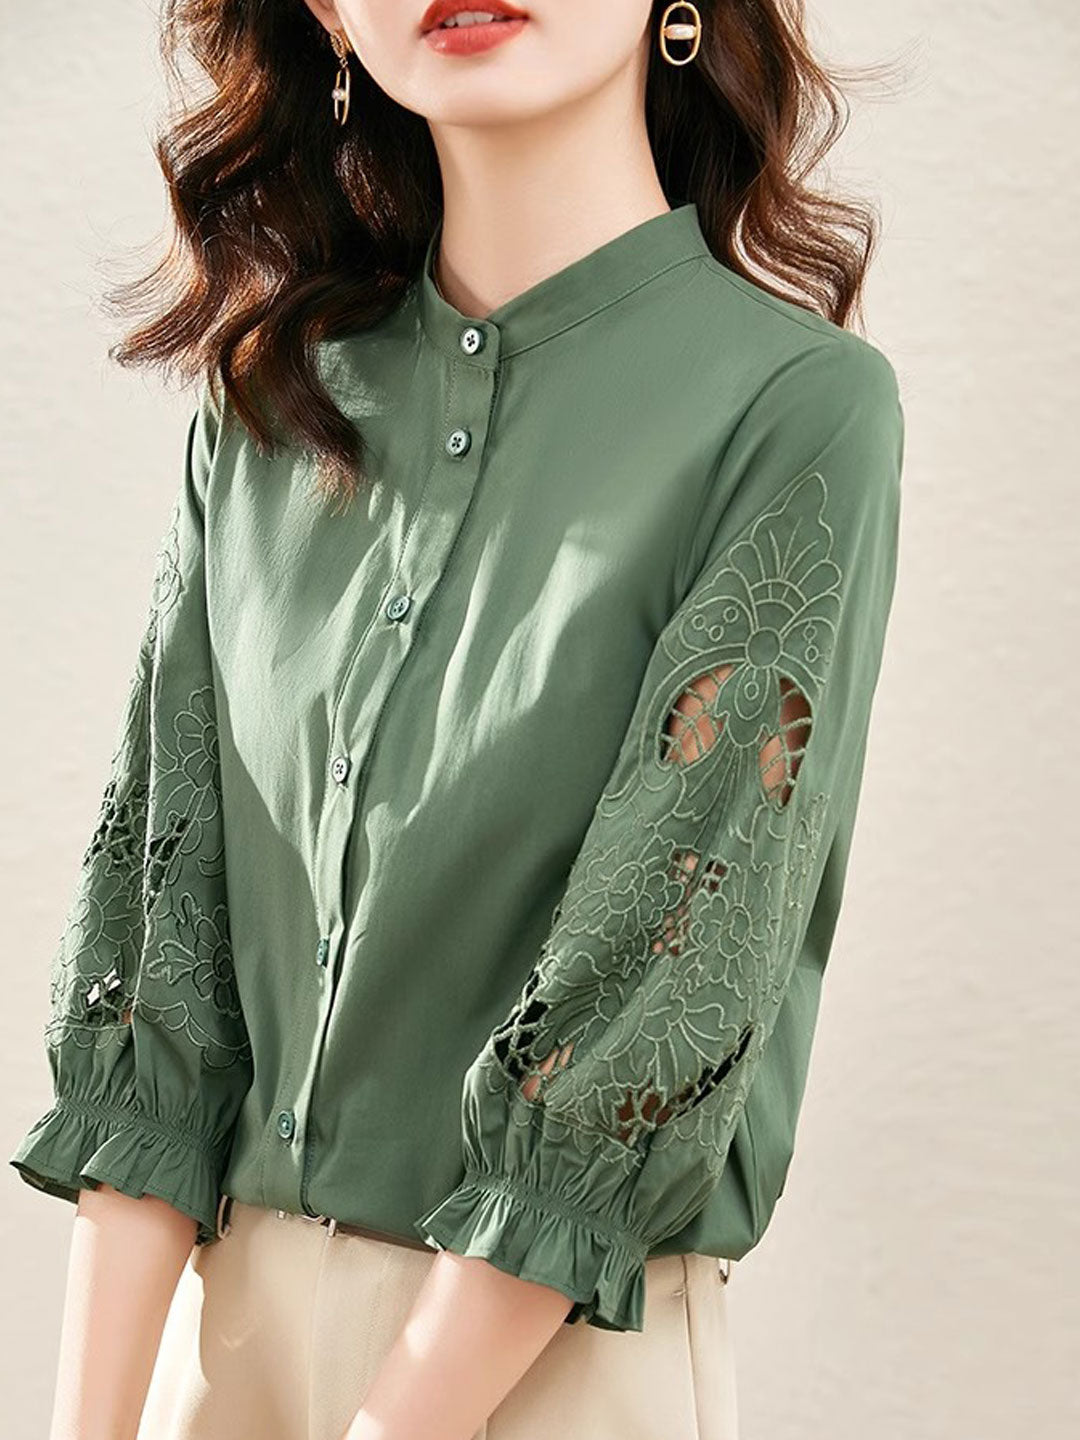 Kayla Casual Embroidered Shirt-White